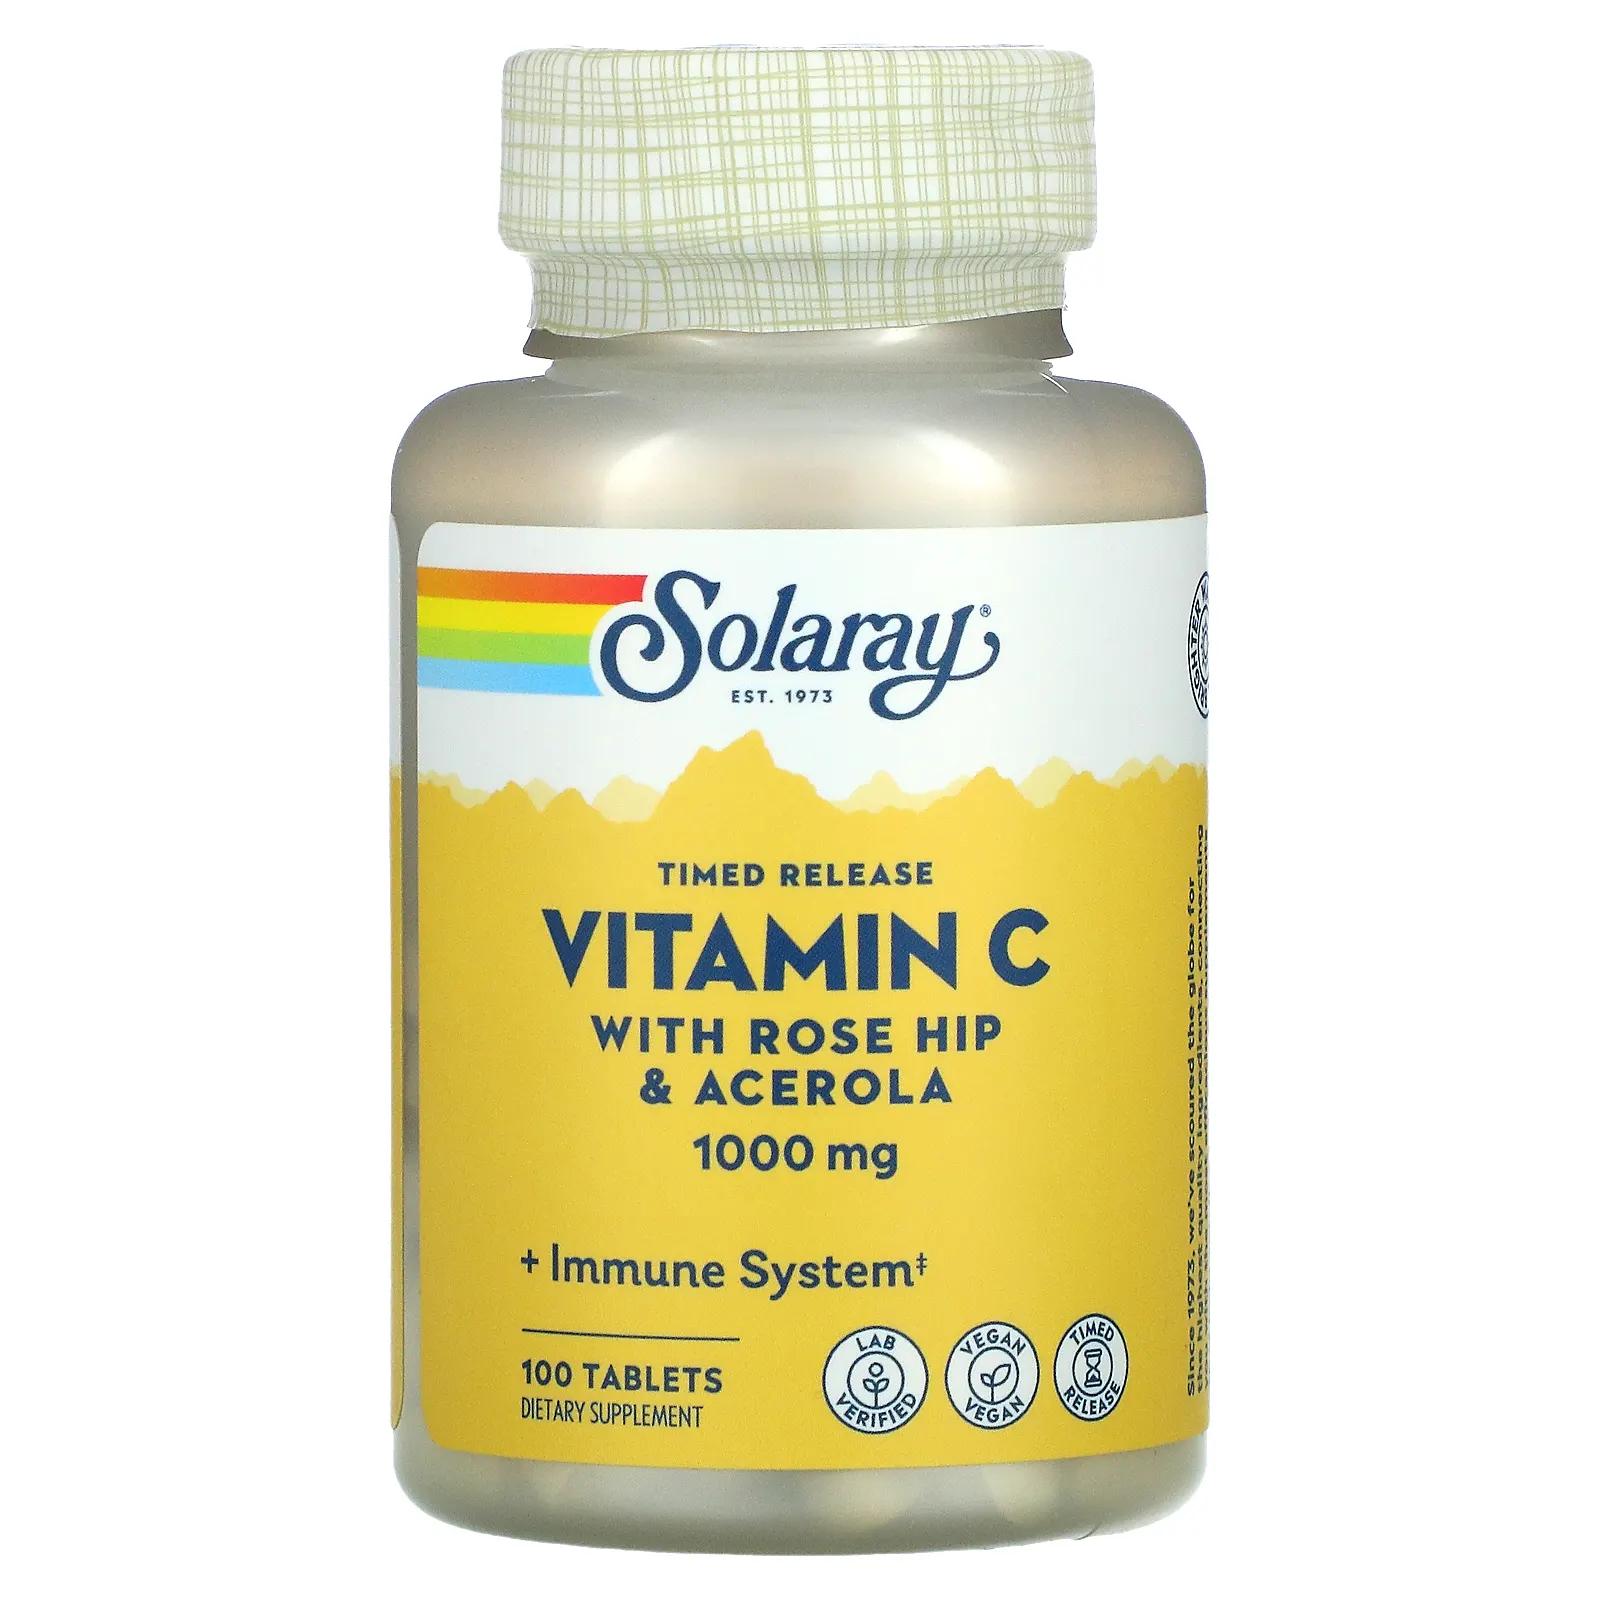 Solaray Vitamin C Timed-Release 1,000 mg 100 Tablets